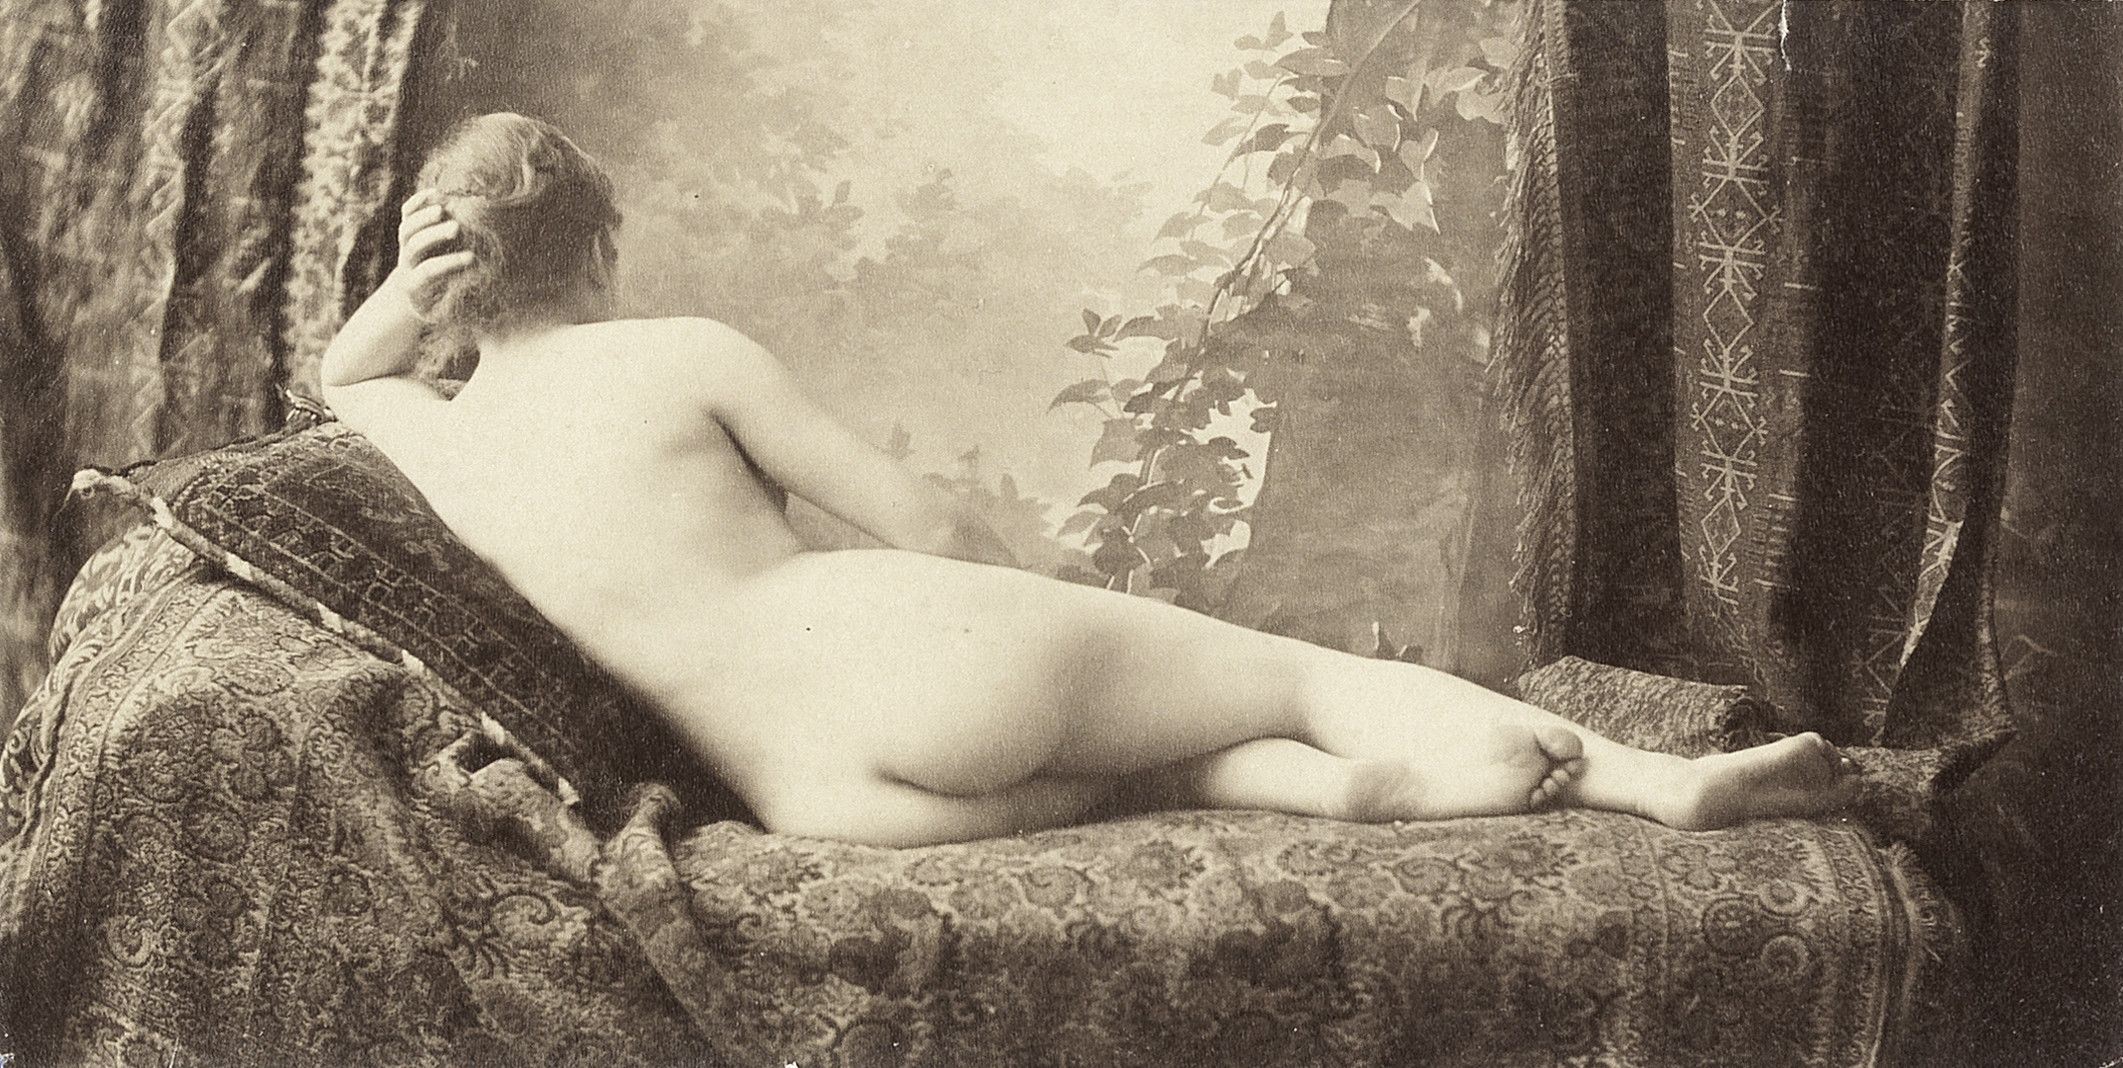 Nude photos from the 1800's